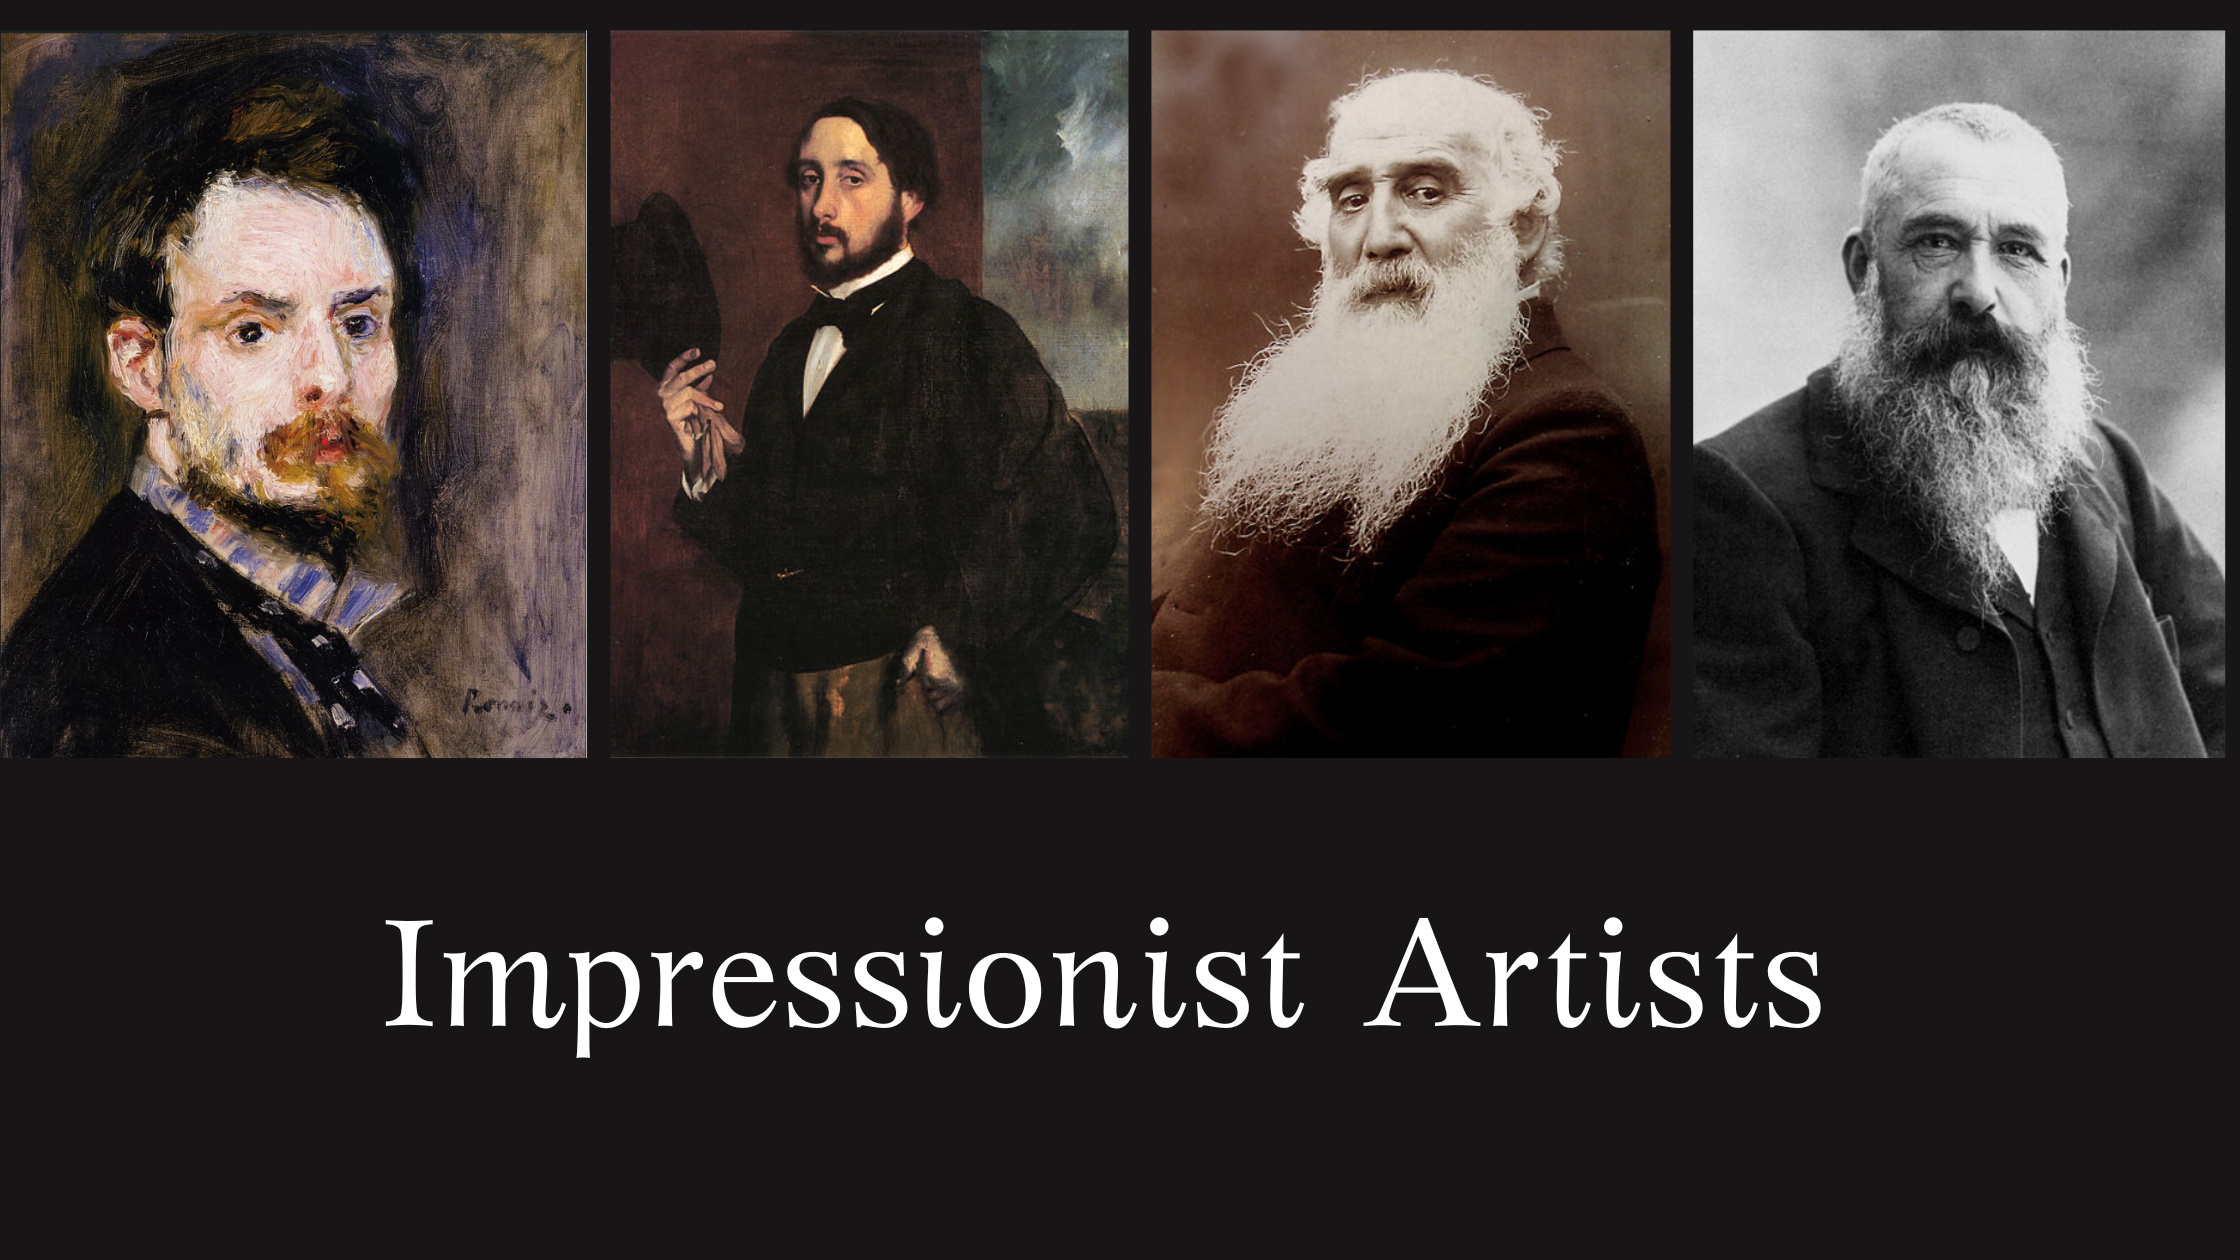 What is an Impressionist Artist